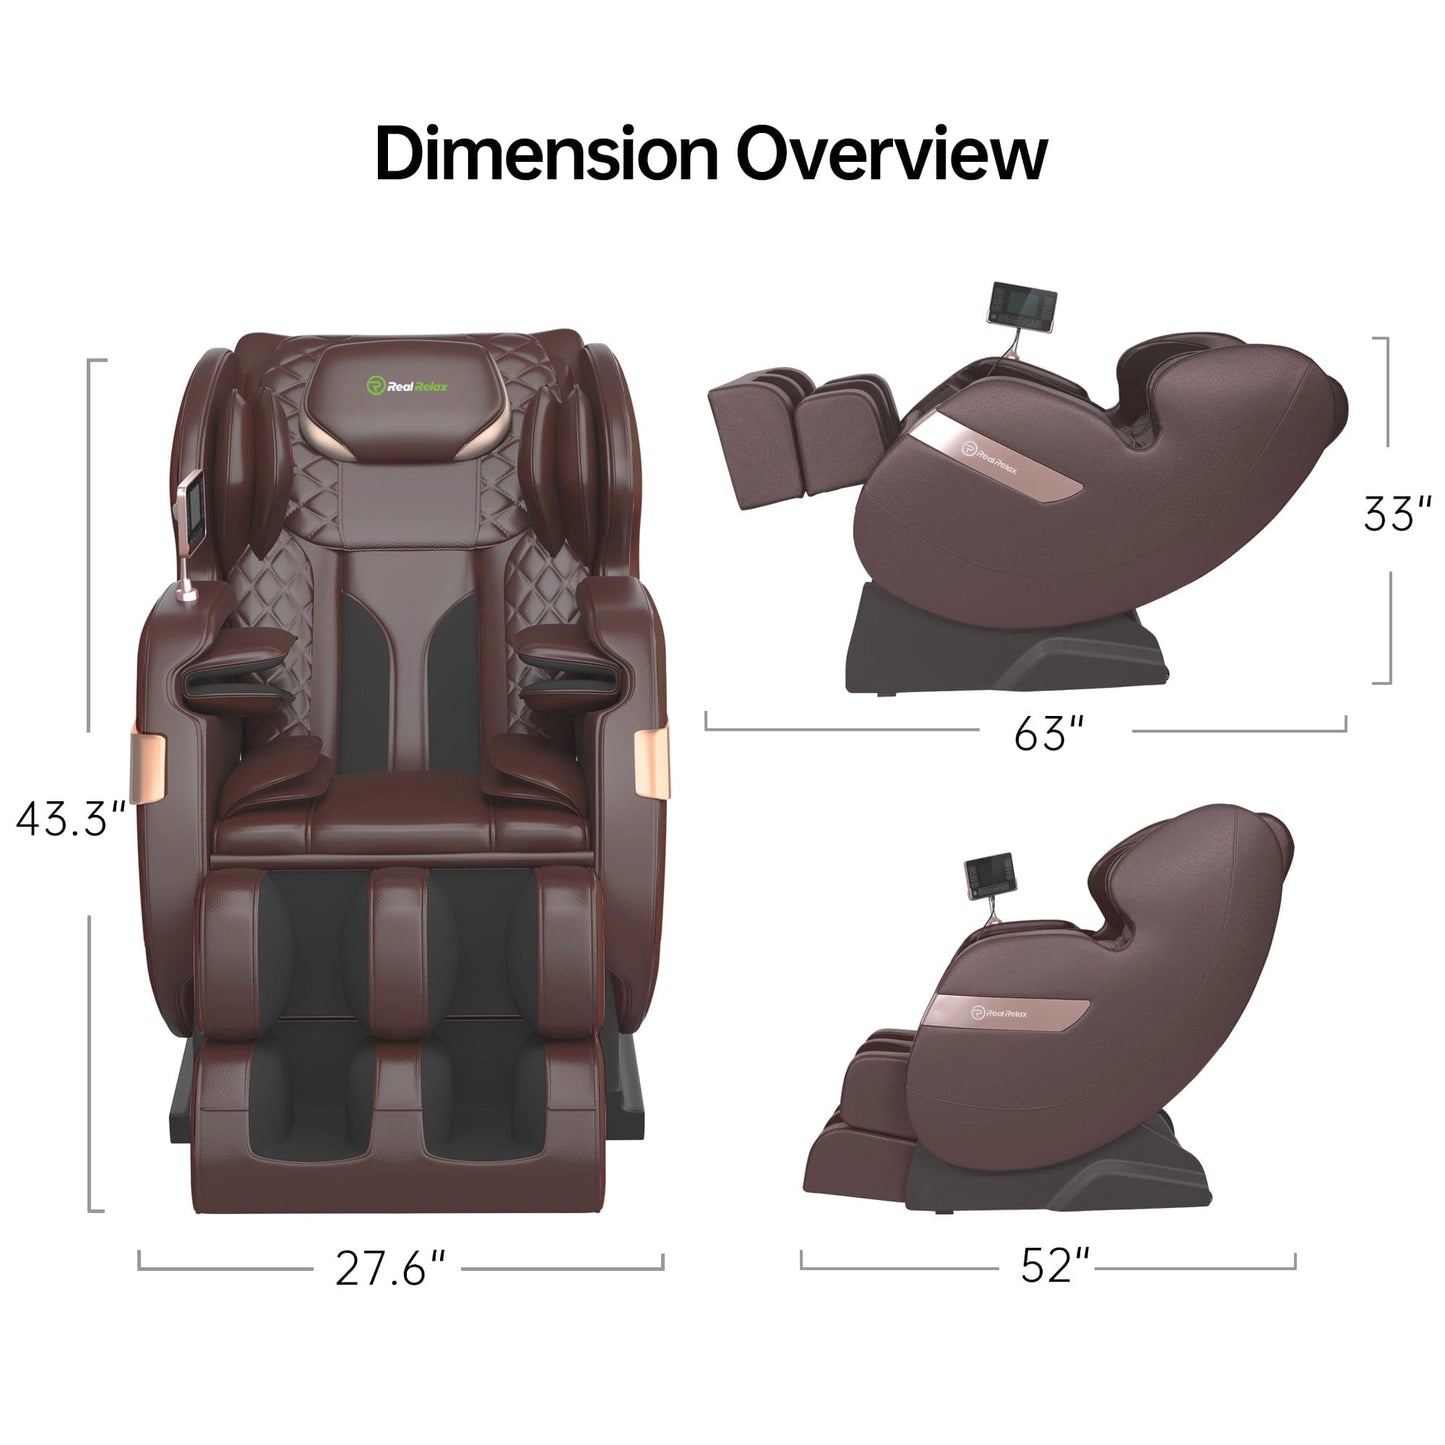 Real Relax Massage Chair Favor-03 ADV Massage Chair Brown